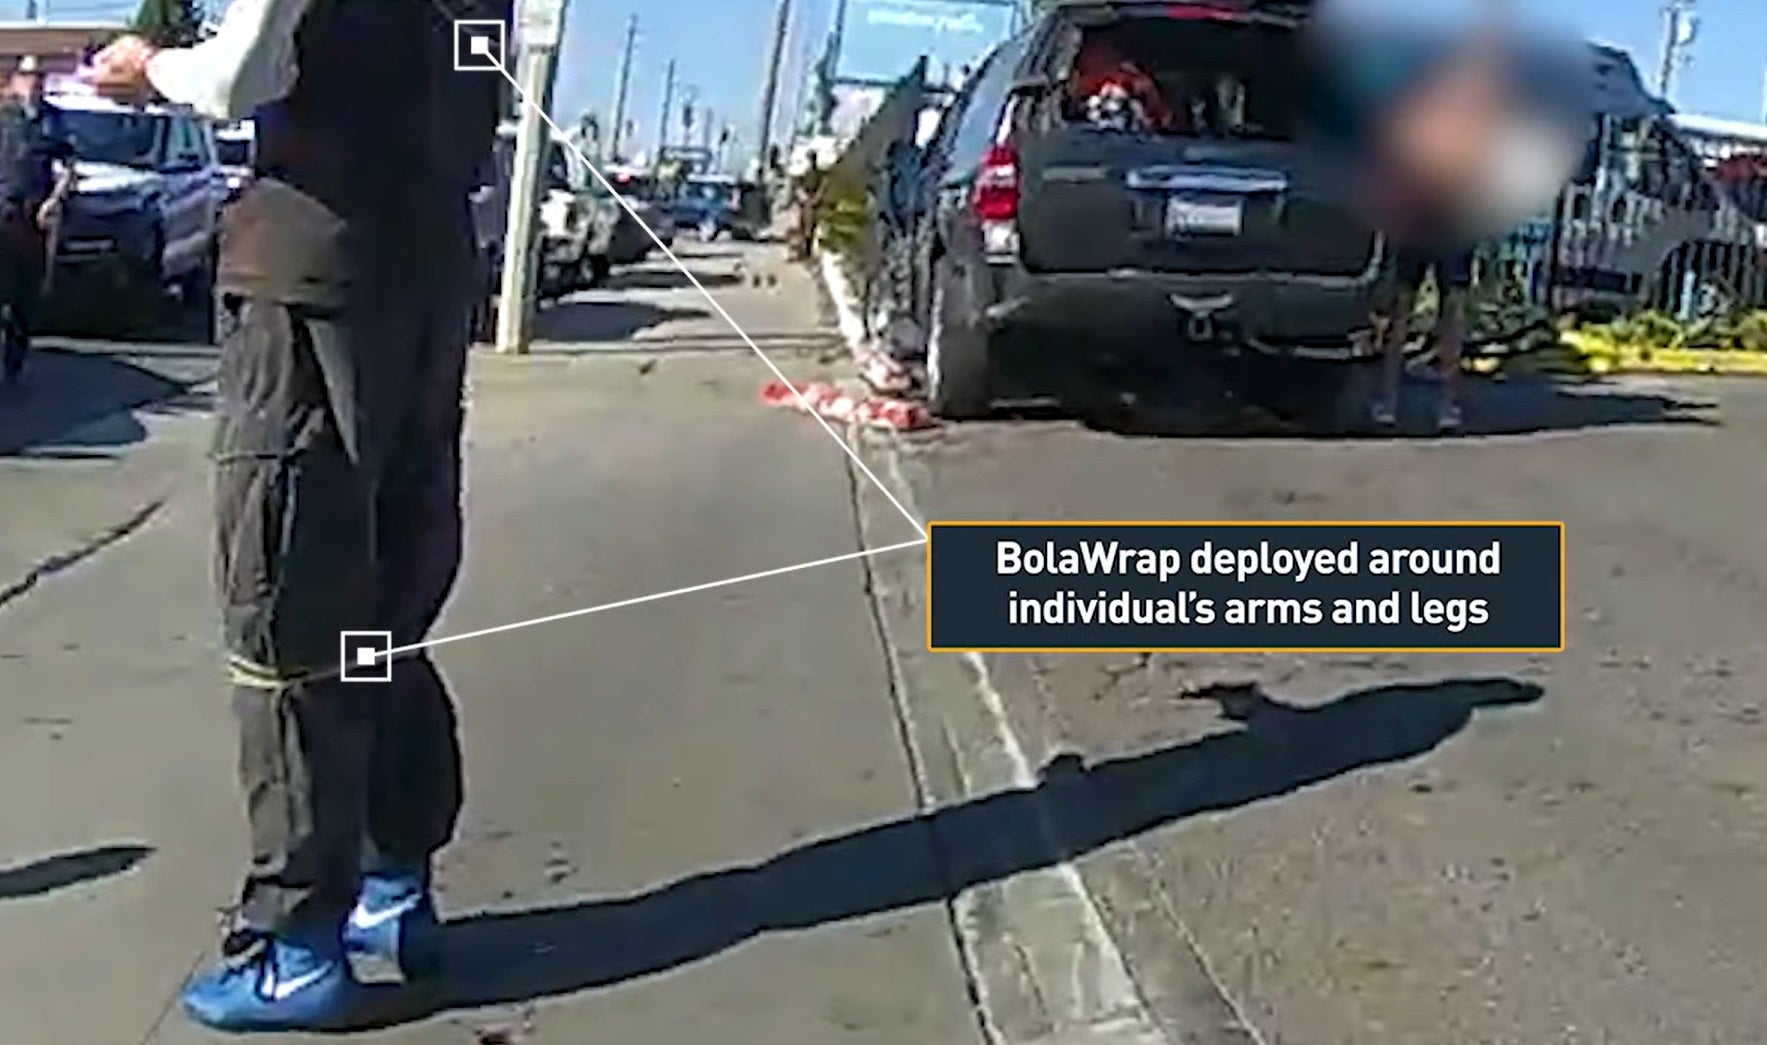 You are currently viewing Police nationwide using high-tech weapon to apprehend suspects without injury: bodycam